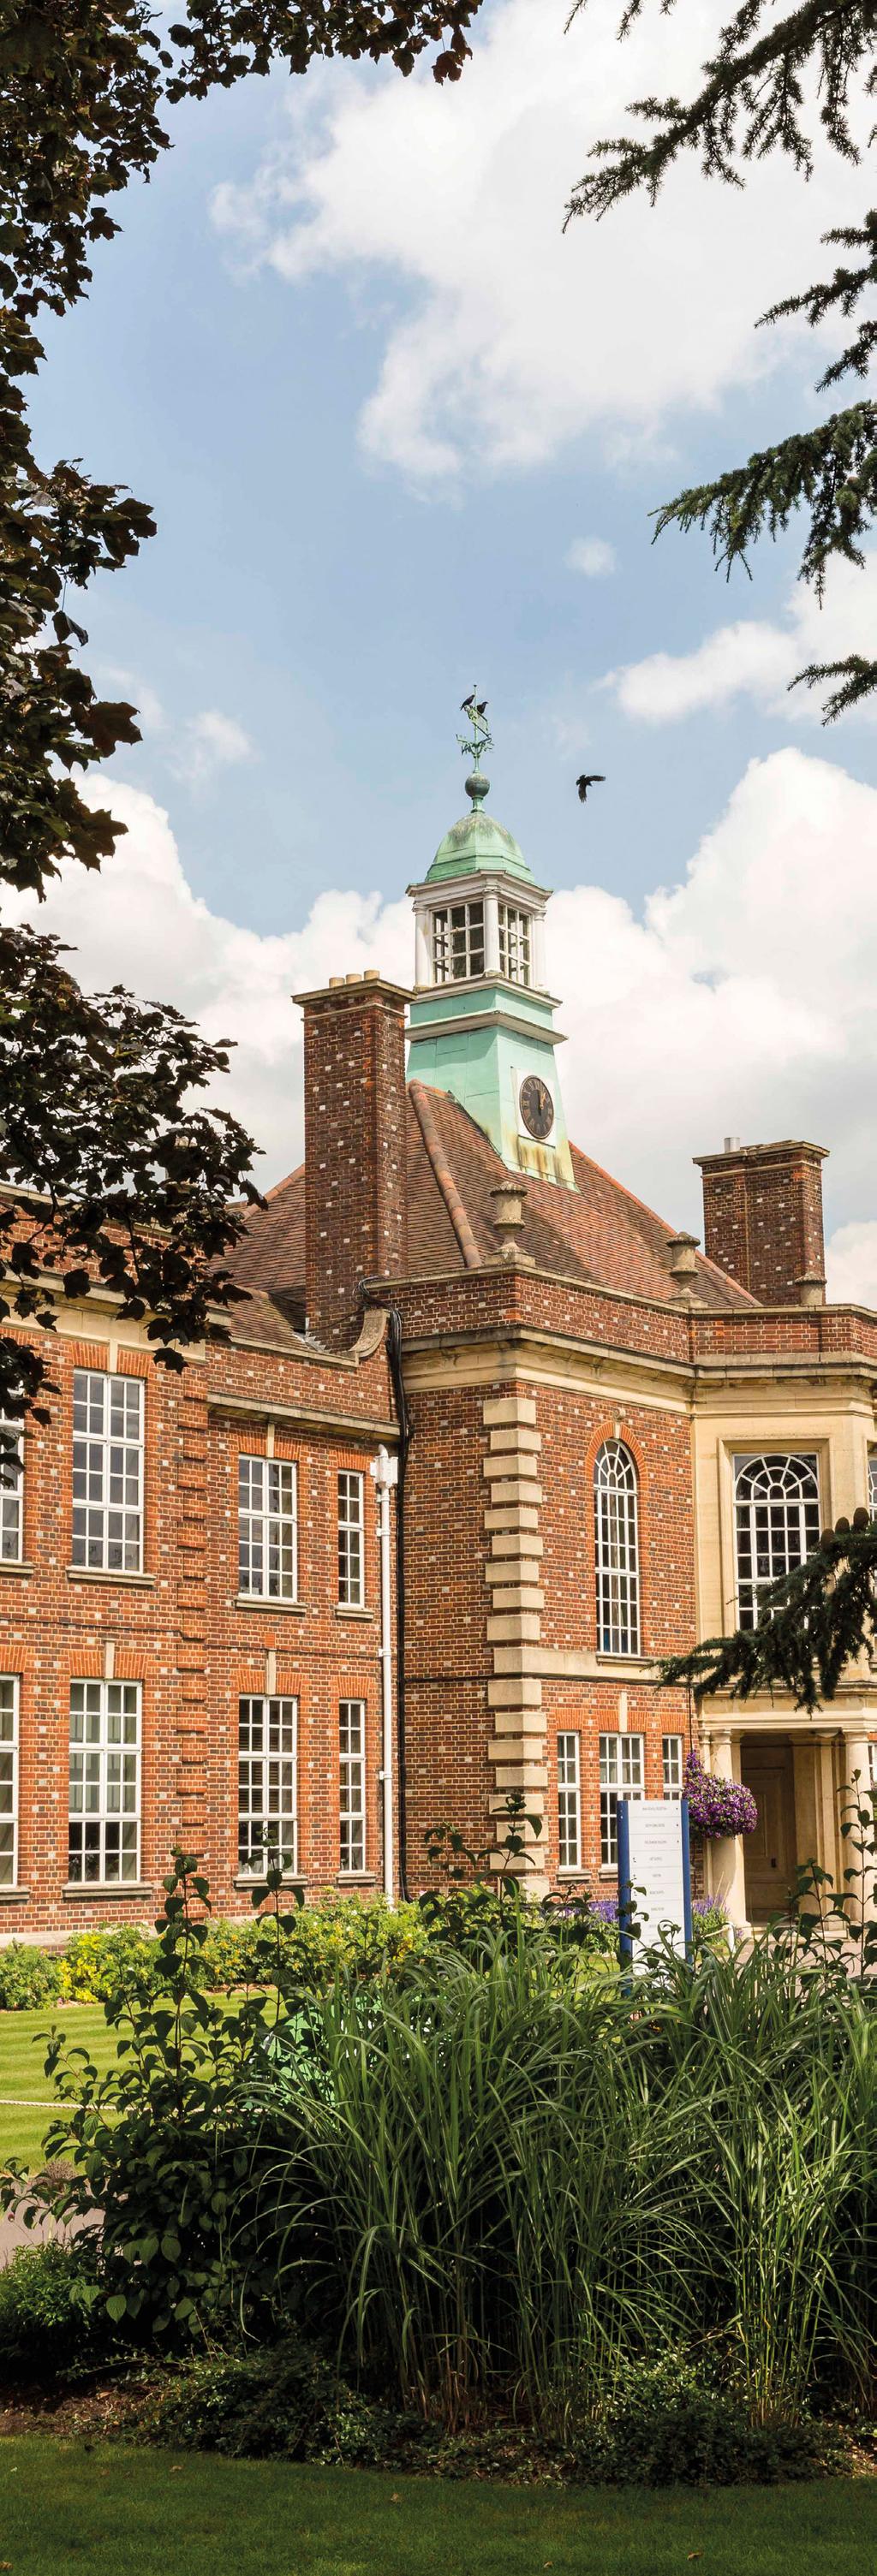 The School & Location Headington was established in 1915 and is one of the UK s foremost schools.